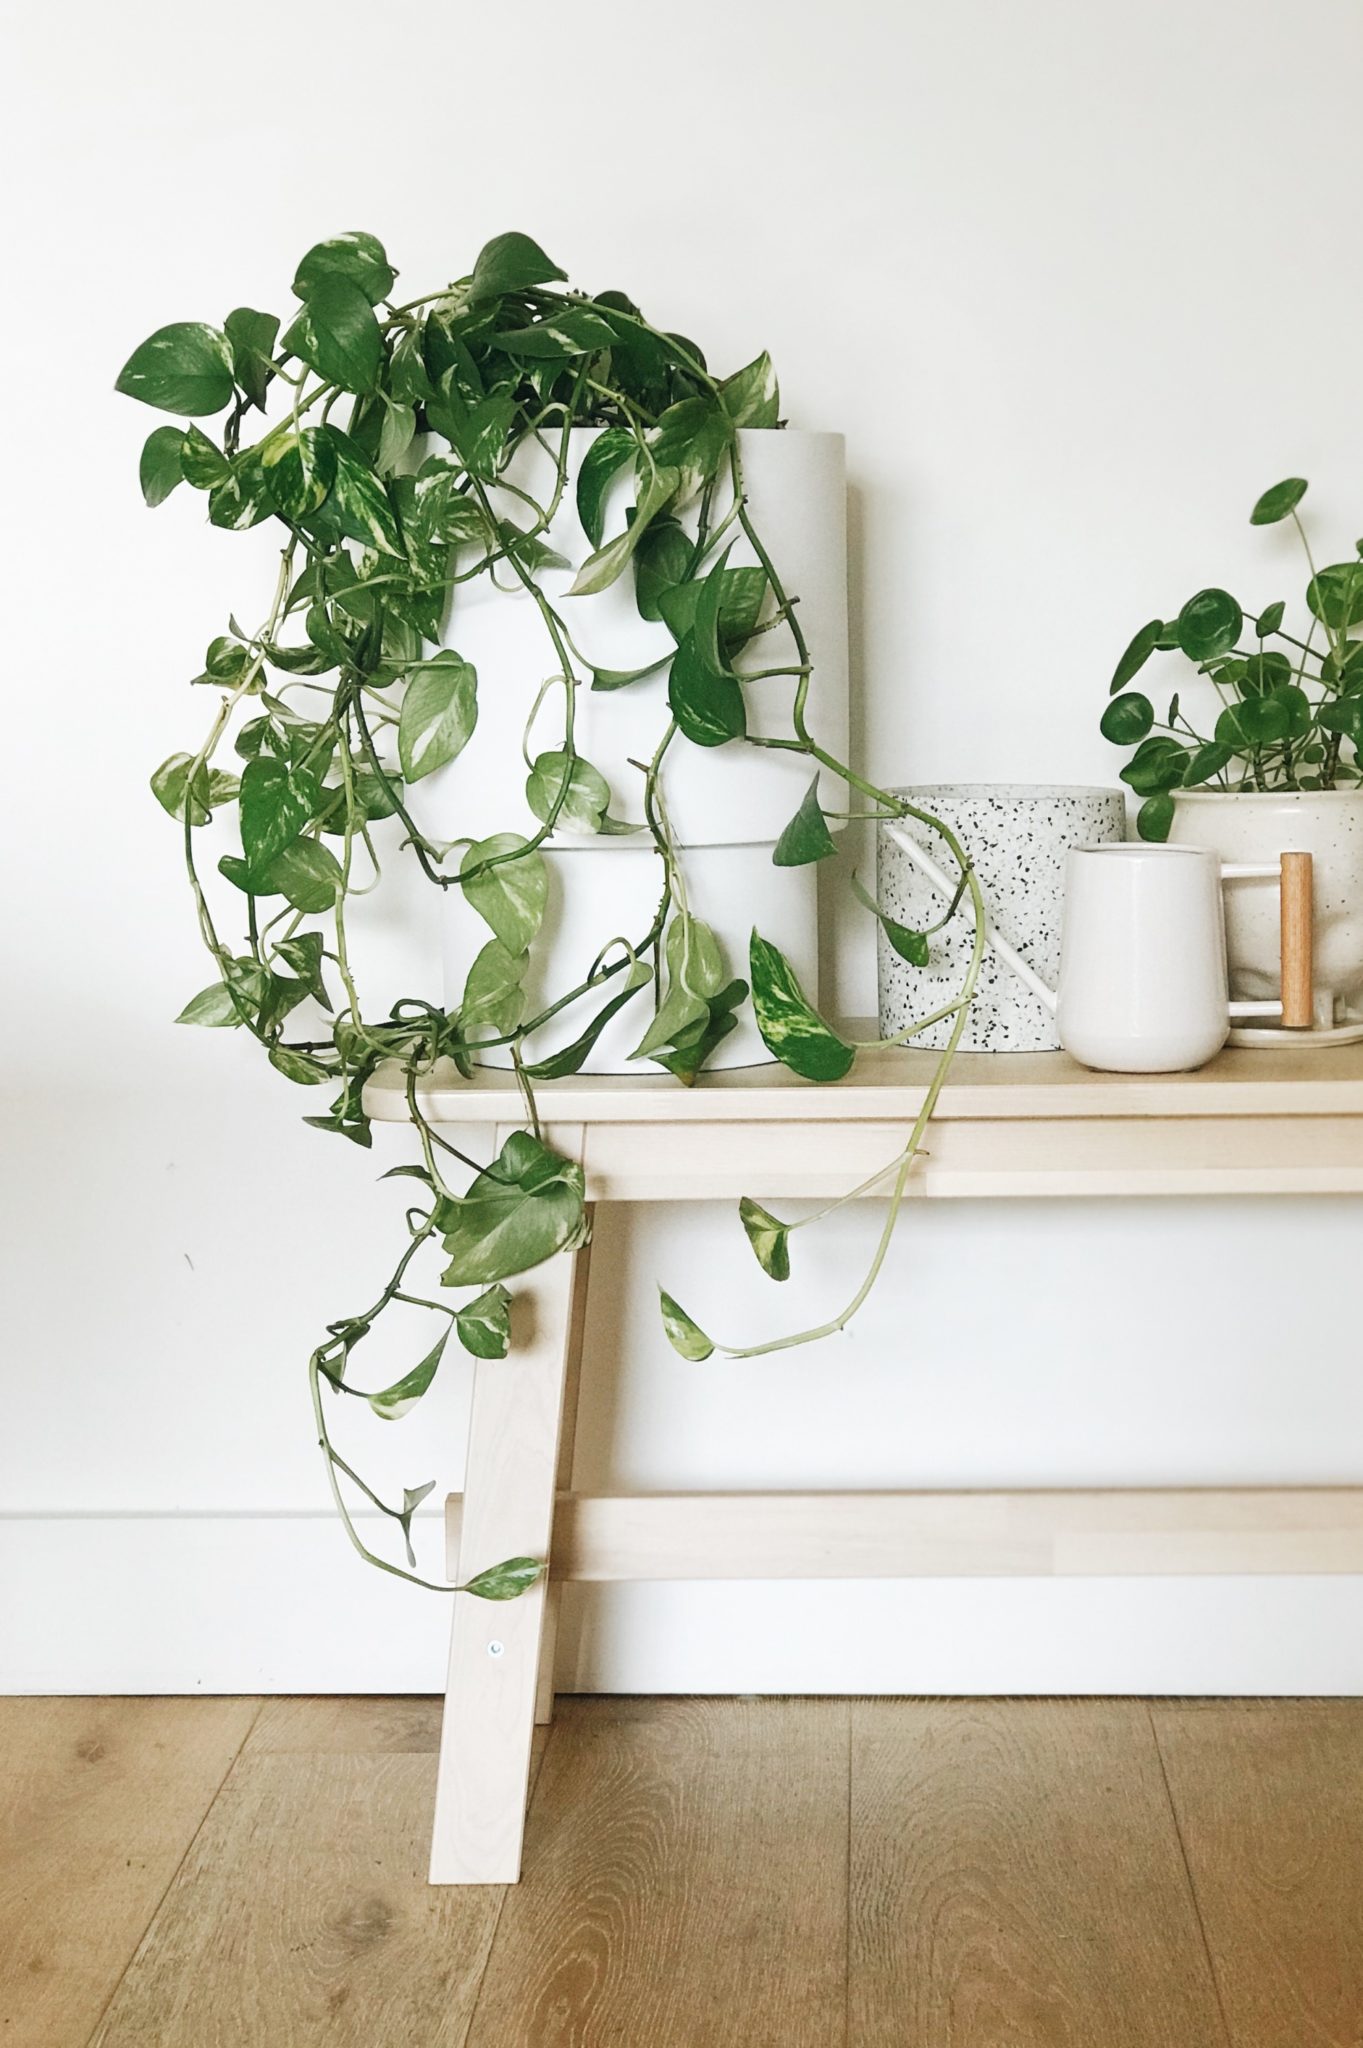 Houseplants: winter care tips to keep them thriving! - The Interiors Addict